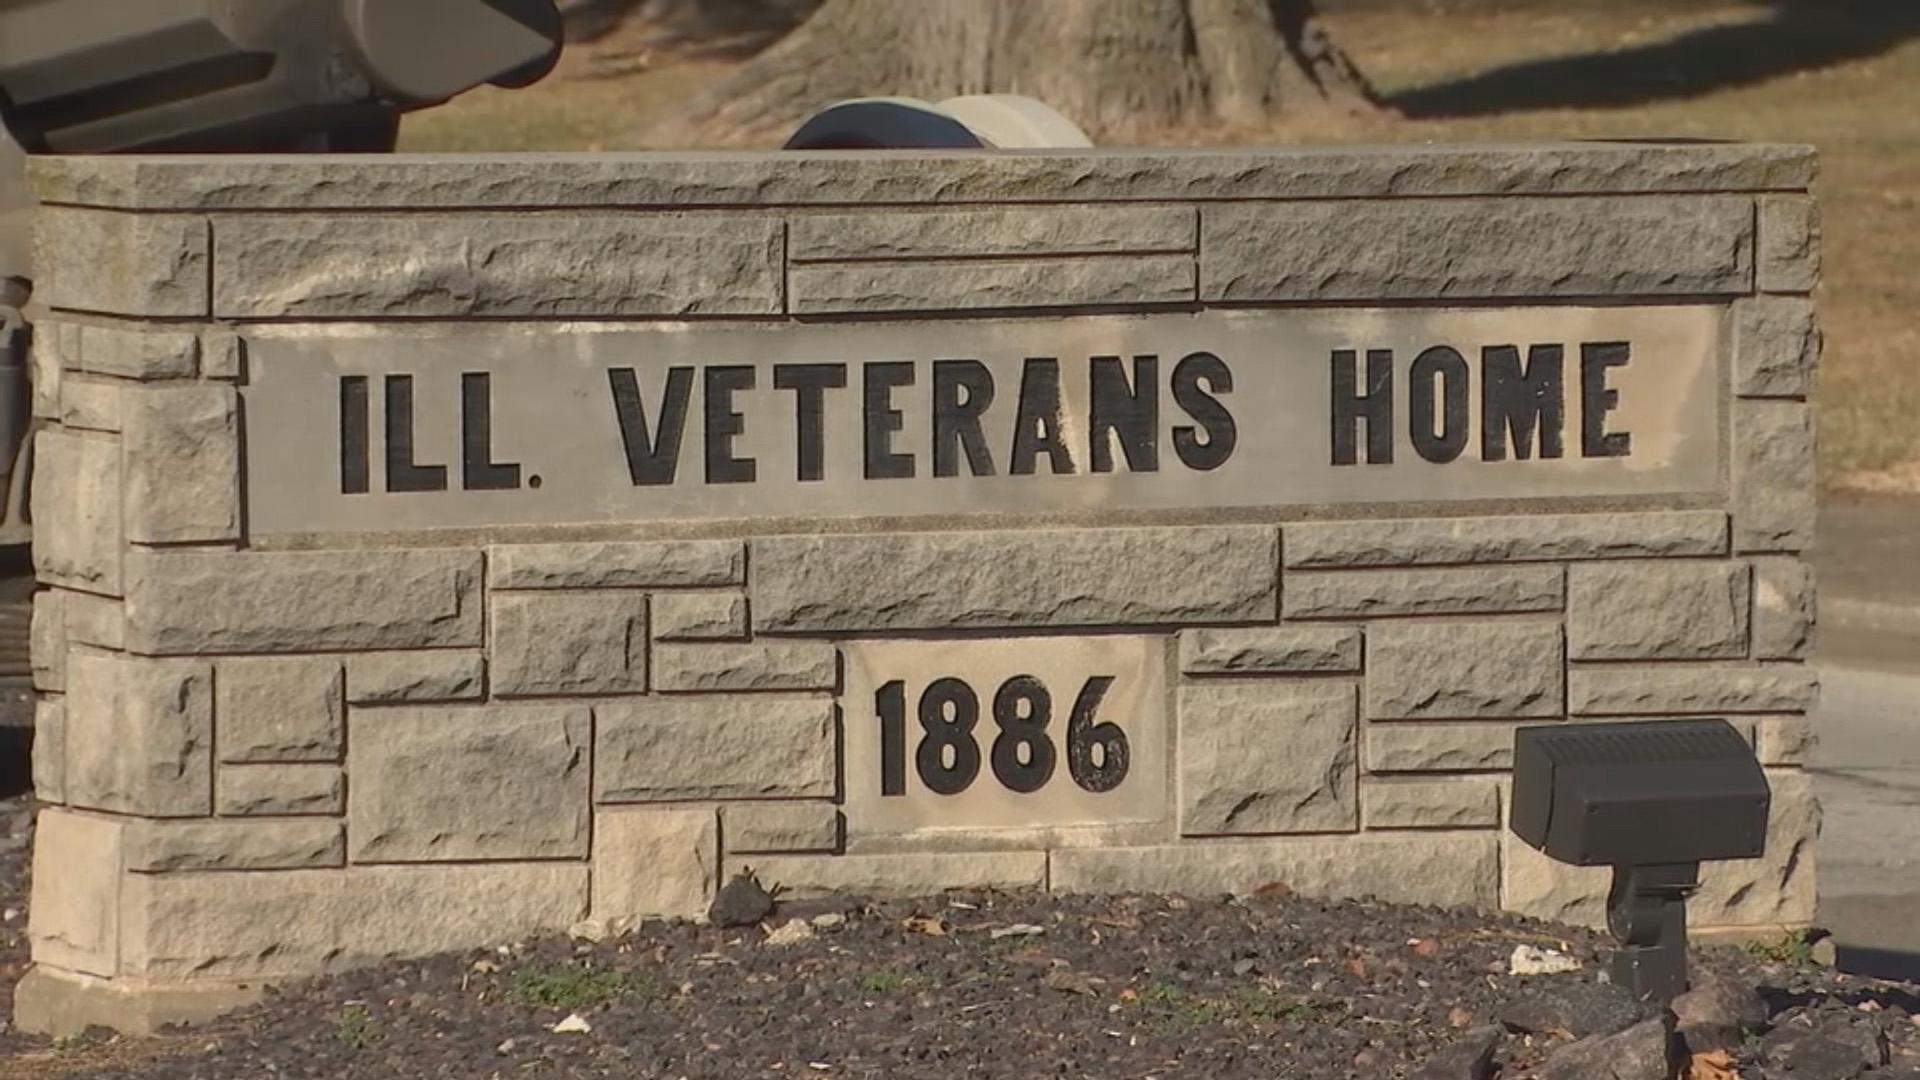 A file photo shows the Illinois Veterans Home at Quincy. (WTTW News)